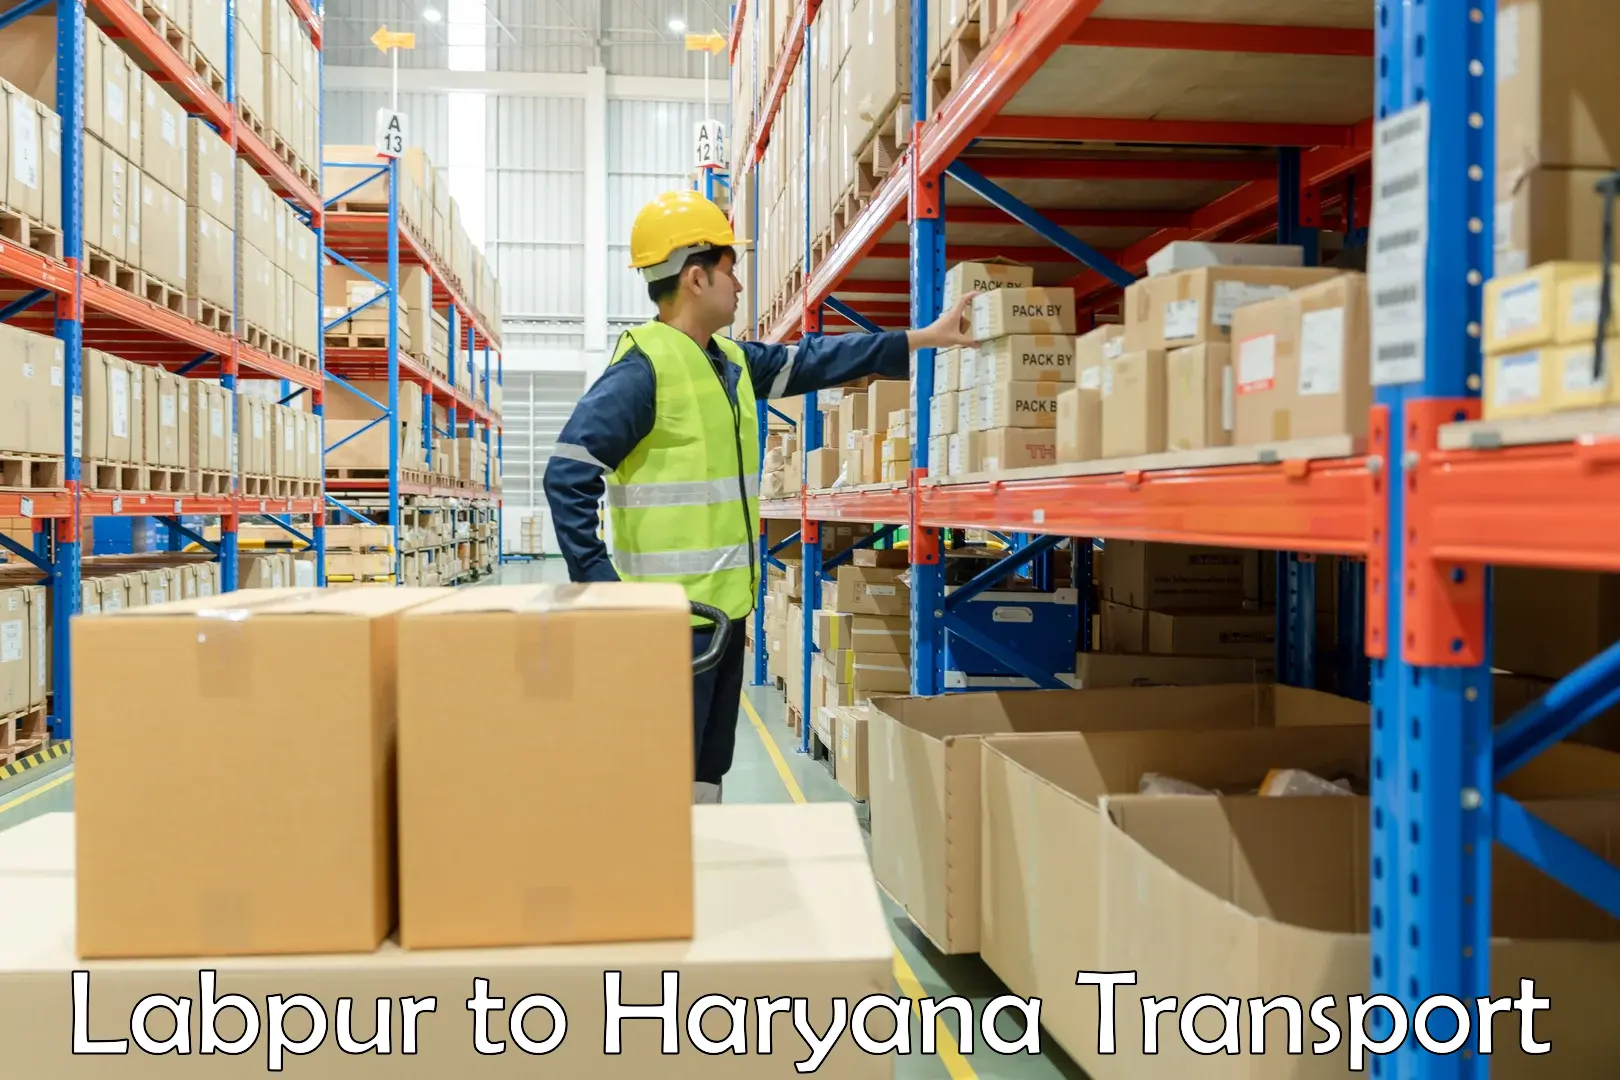 Air freight transport services in Labpur to Bilaspur Haryana